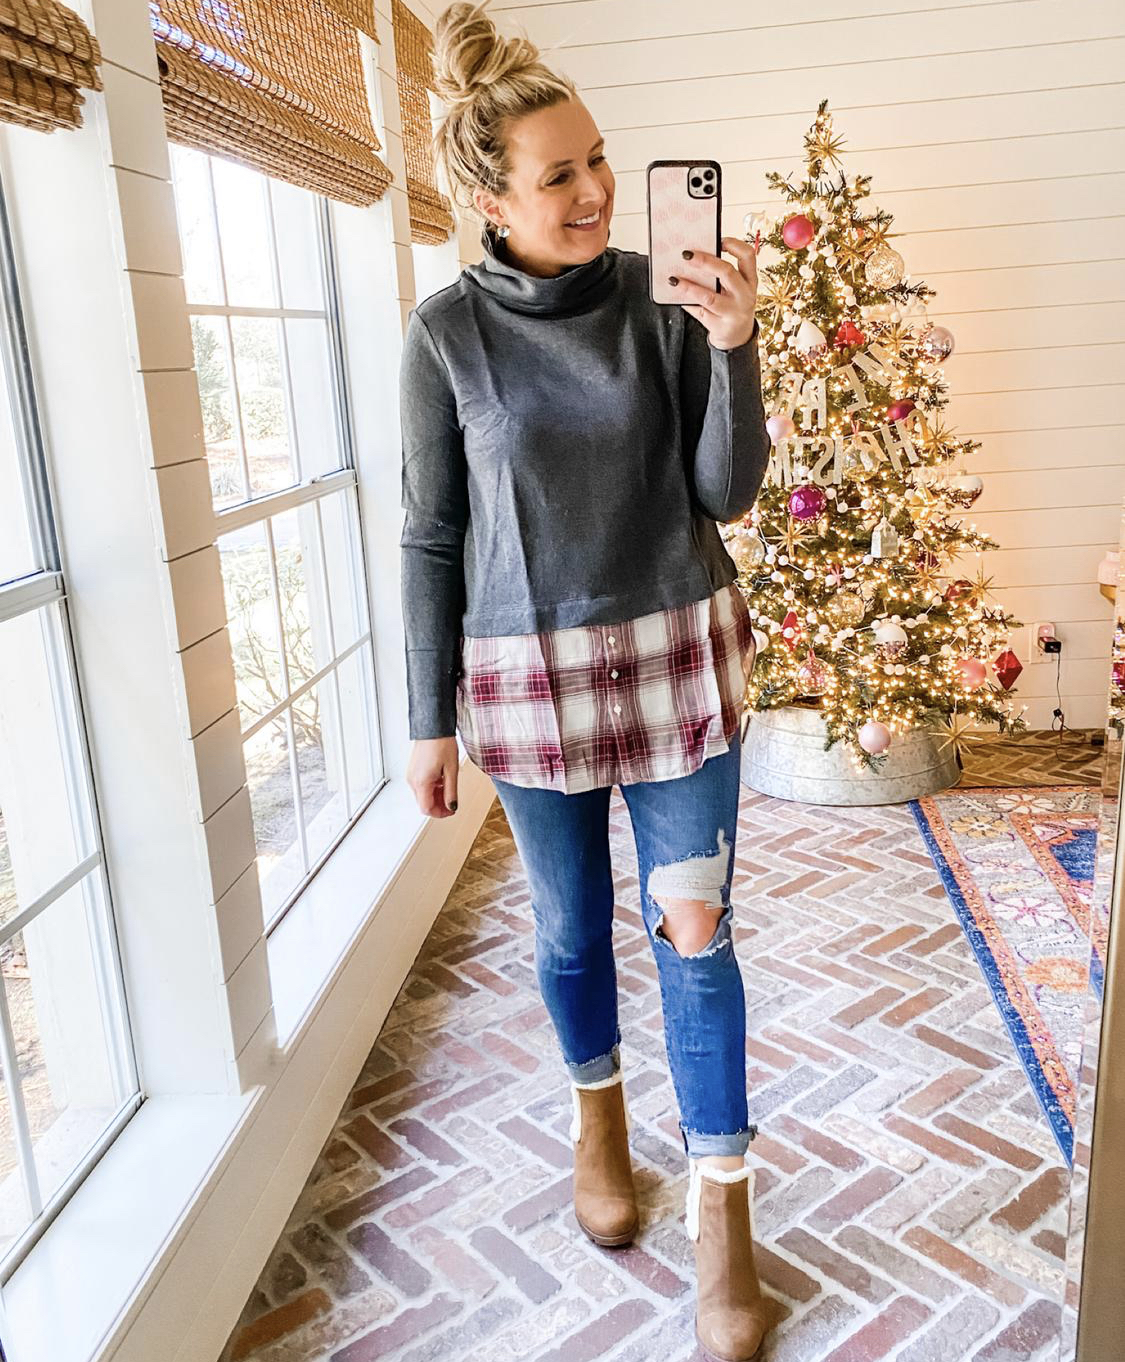 December Outfits by popular Houston fashion blog, Fancy Ashley: image of a woman standing in front of a Christmas tree decorated with pink, white and silver ornaments and wearing a grey and red and white plaid turtleneck shirt, distressed denim, and fur lined brown sueded ankle boots. 